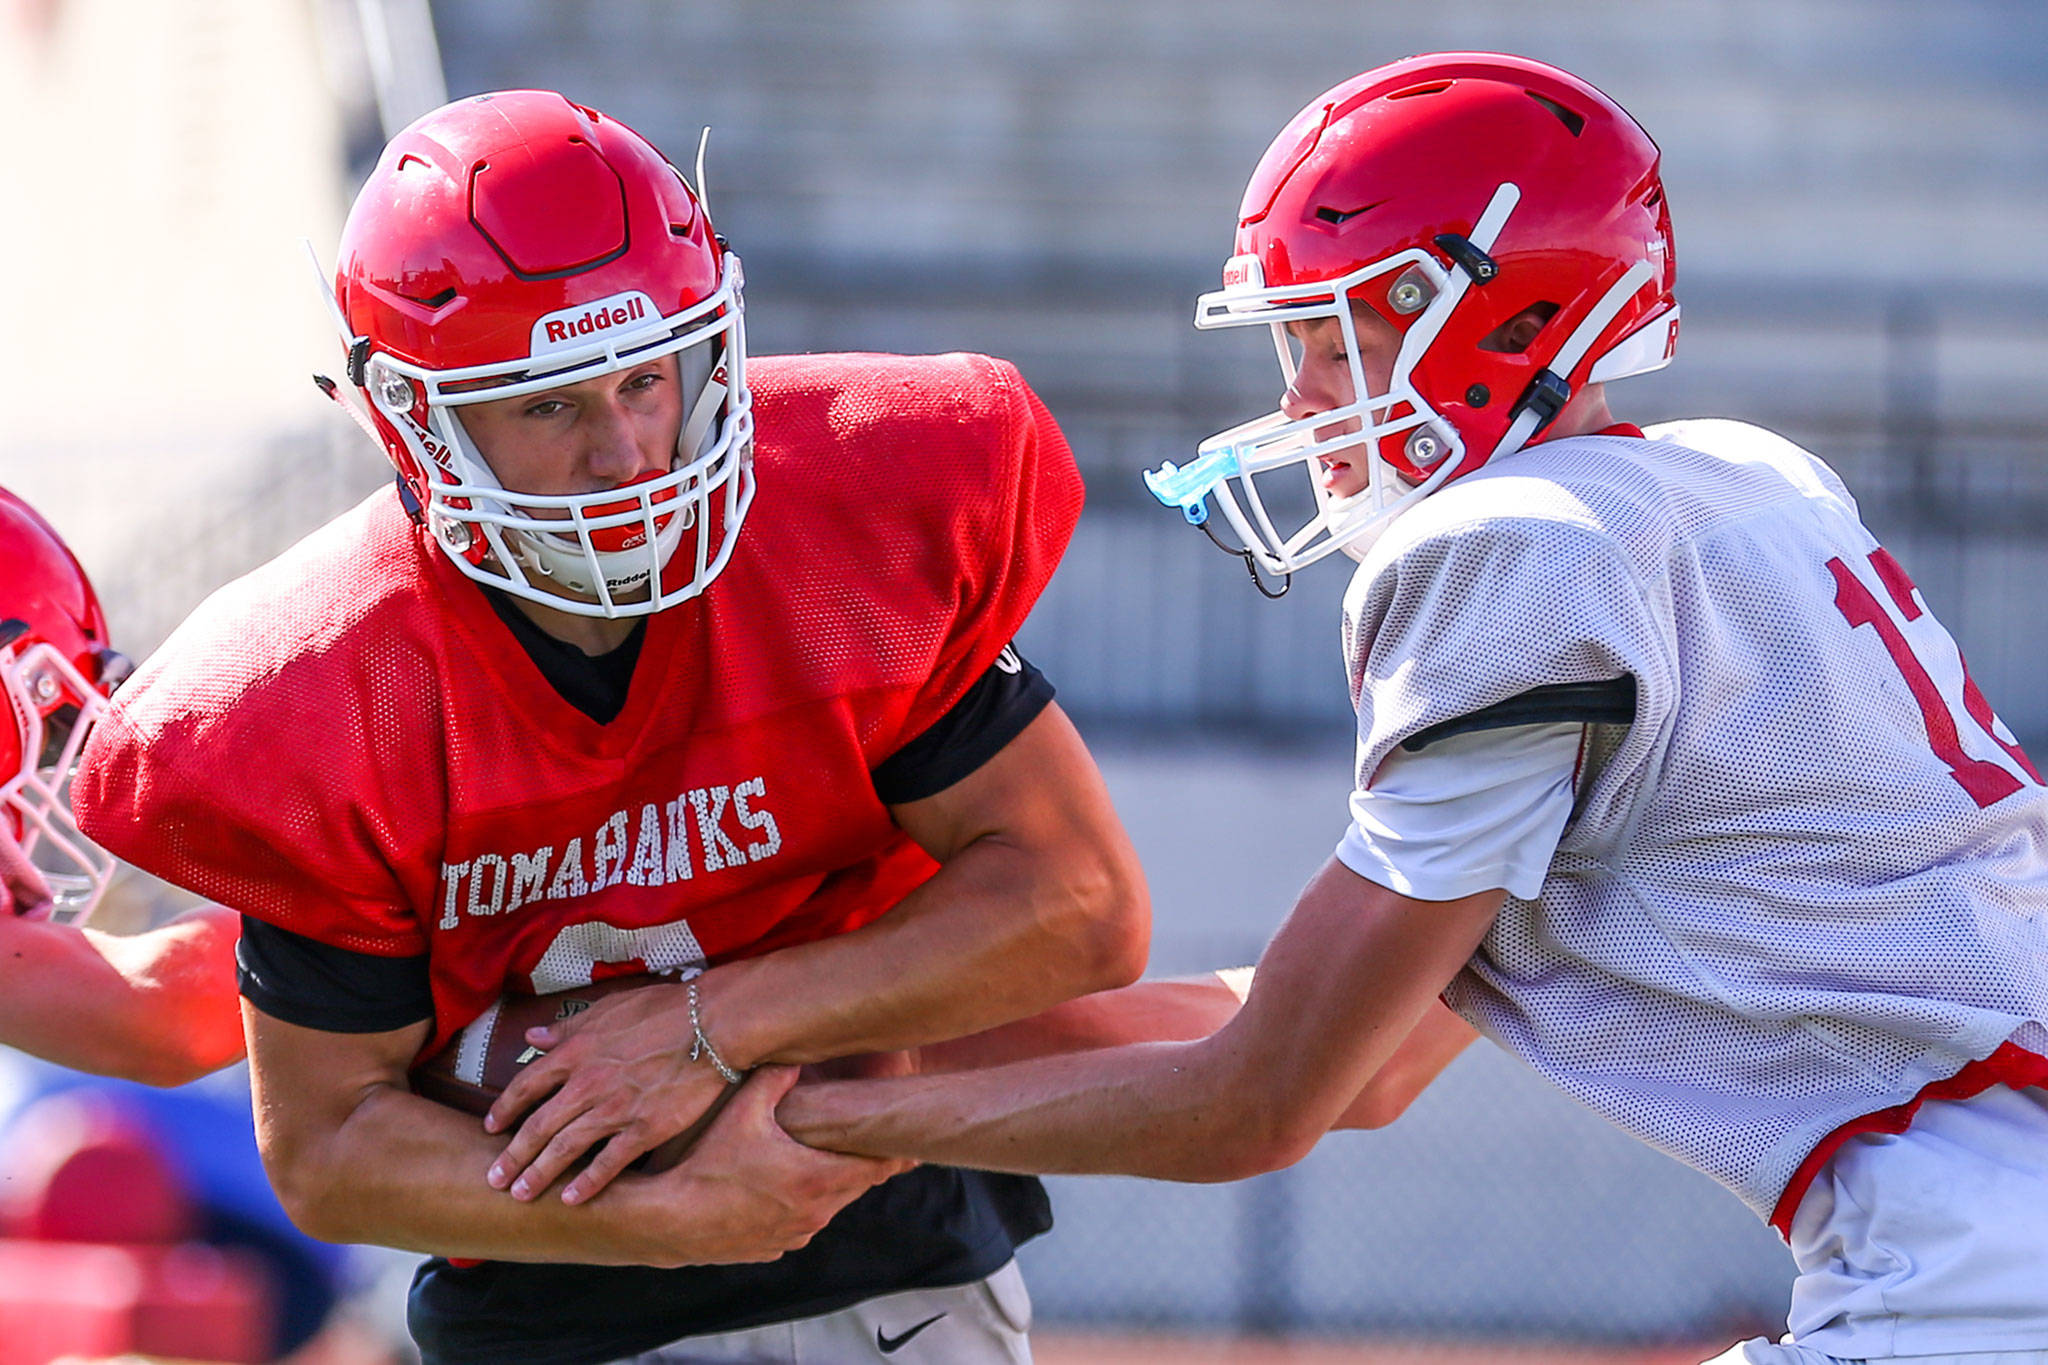 Jordan Justice (left), pictured during an August practice, has four touchdown runs of more than 55 yards. (Kevin Clark / The Herald)